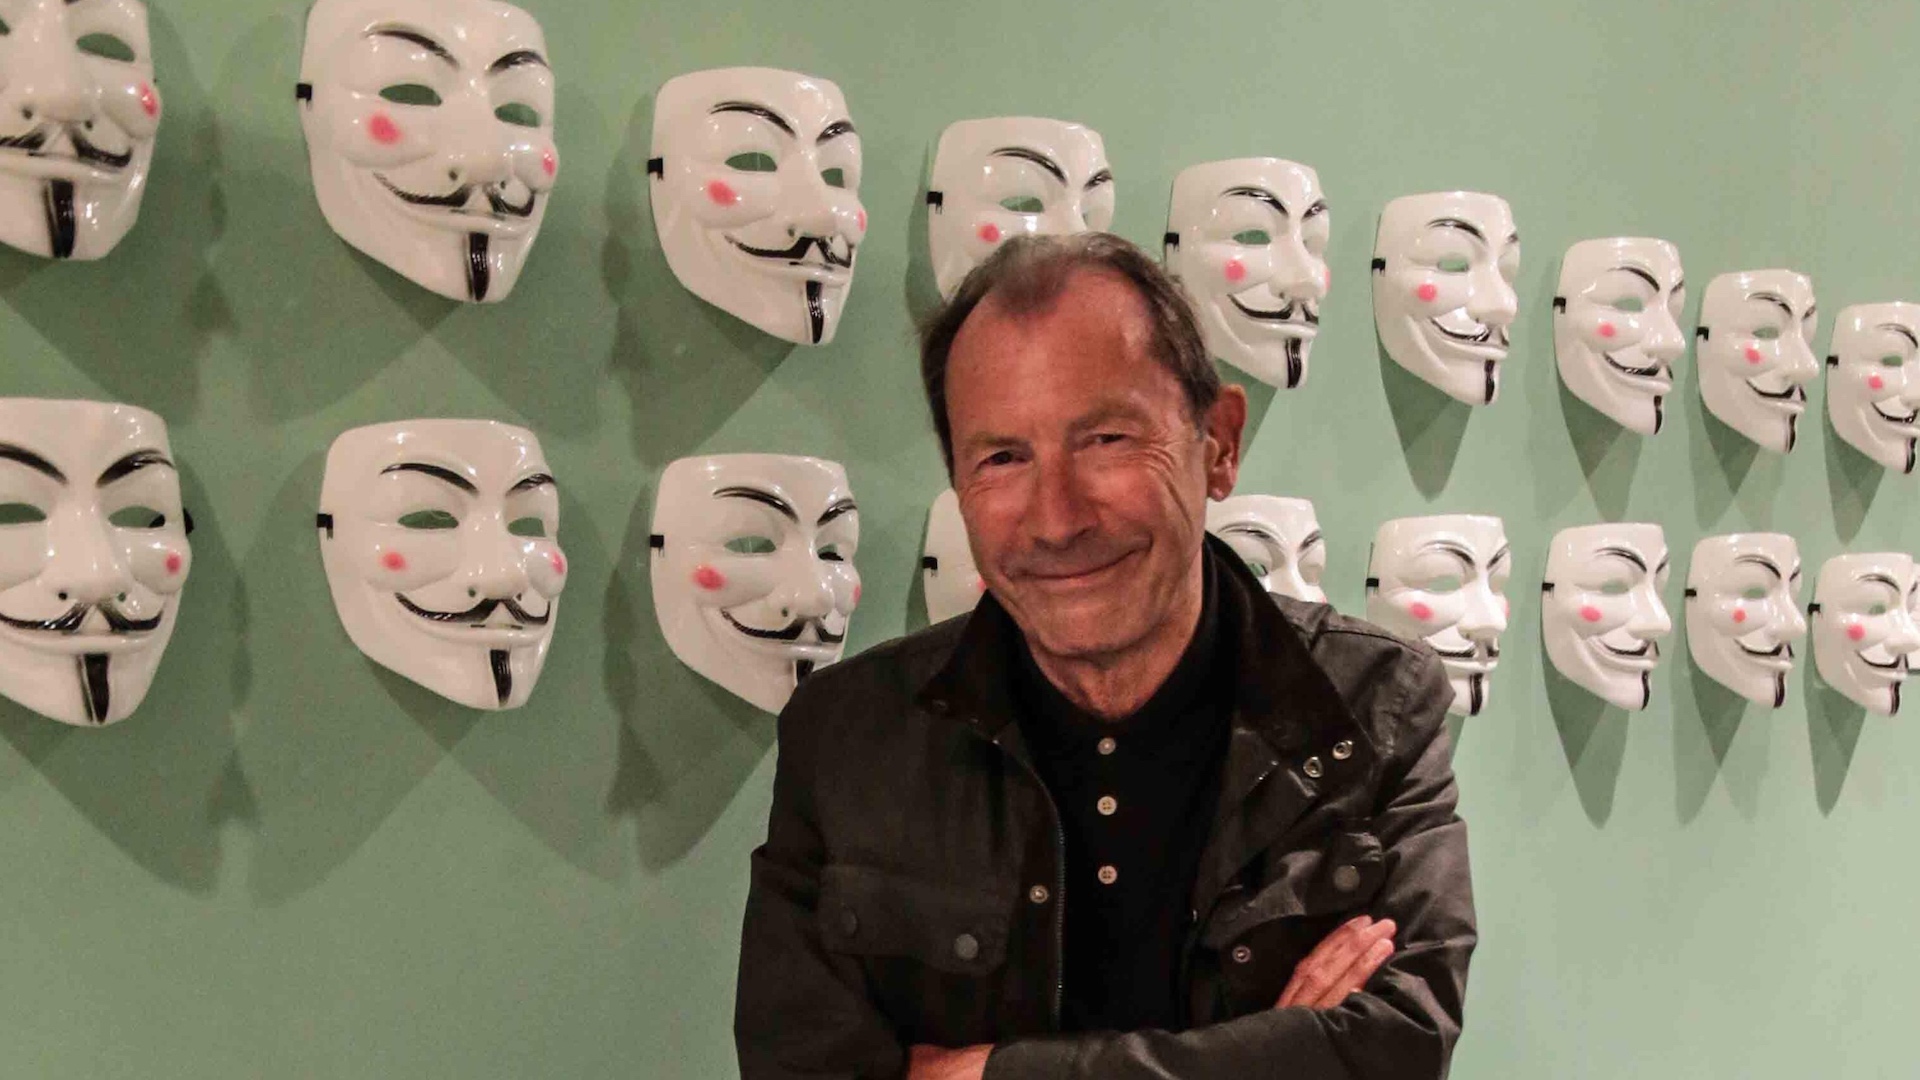 Artist David Lloyd. stands in front of the V for Vendetta masks he originally designed which became an emblem for the Occupy movement.